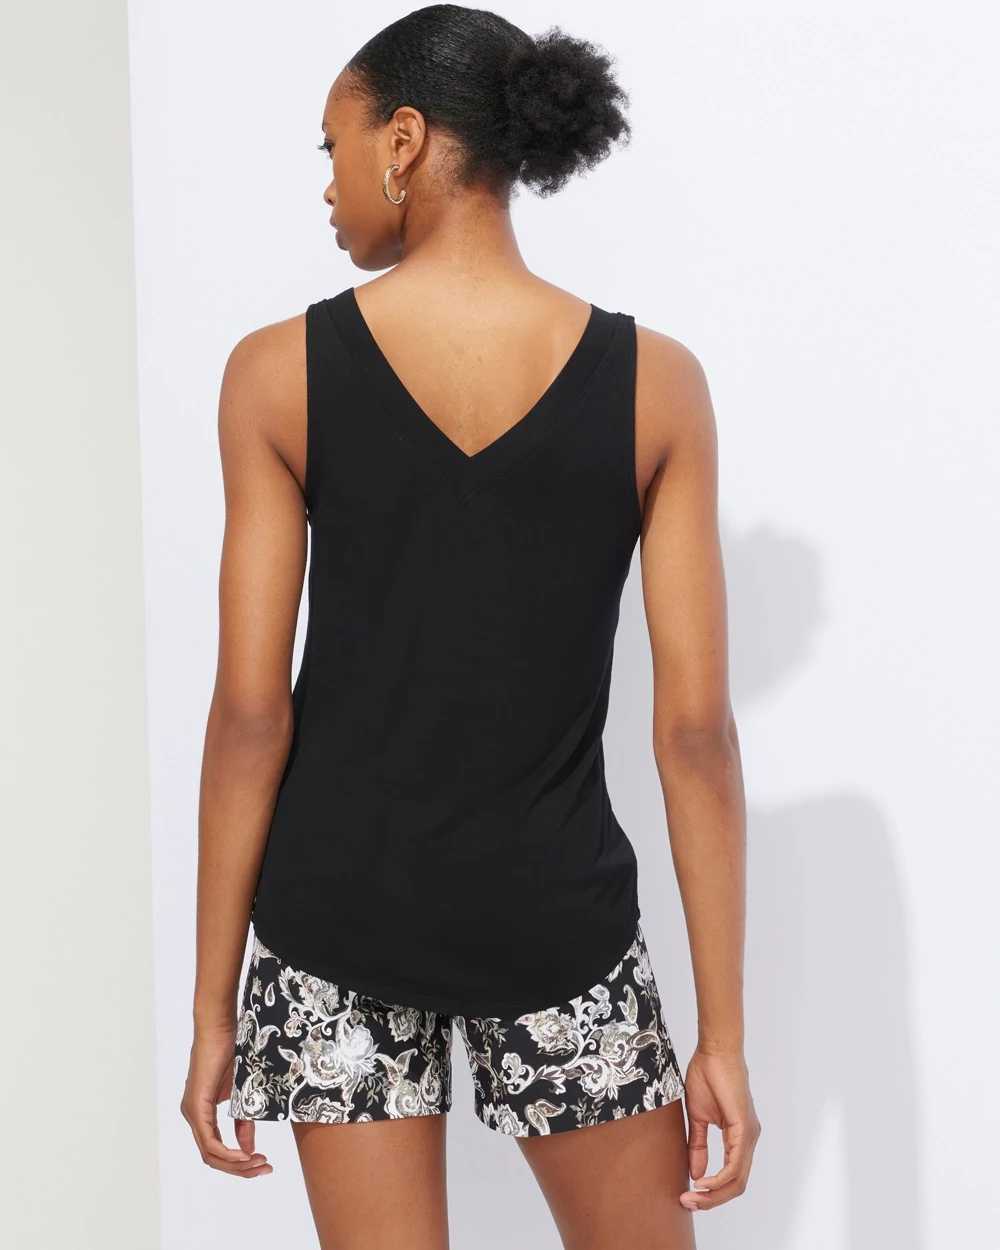 Outlet WHBM Double-V Tank Top click to view larger image.